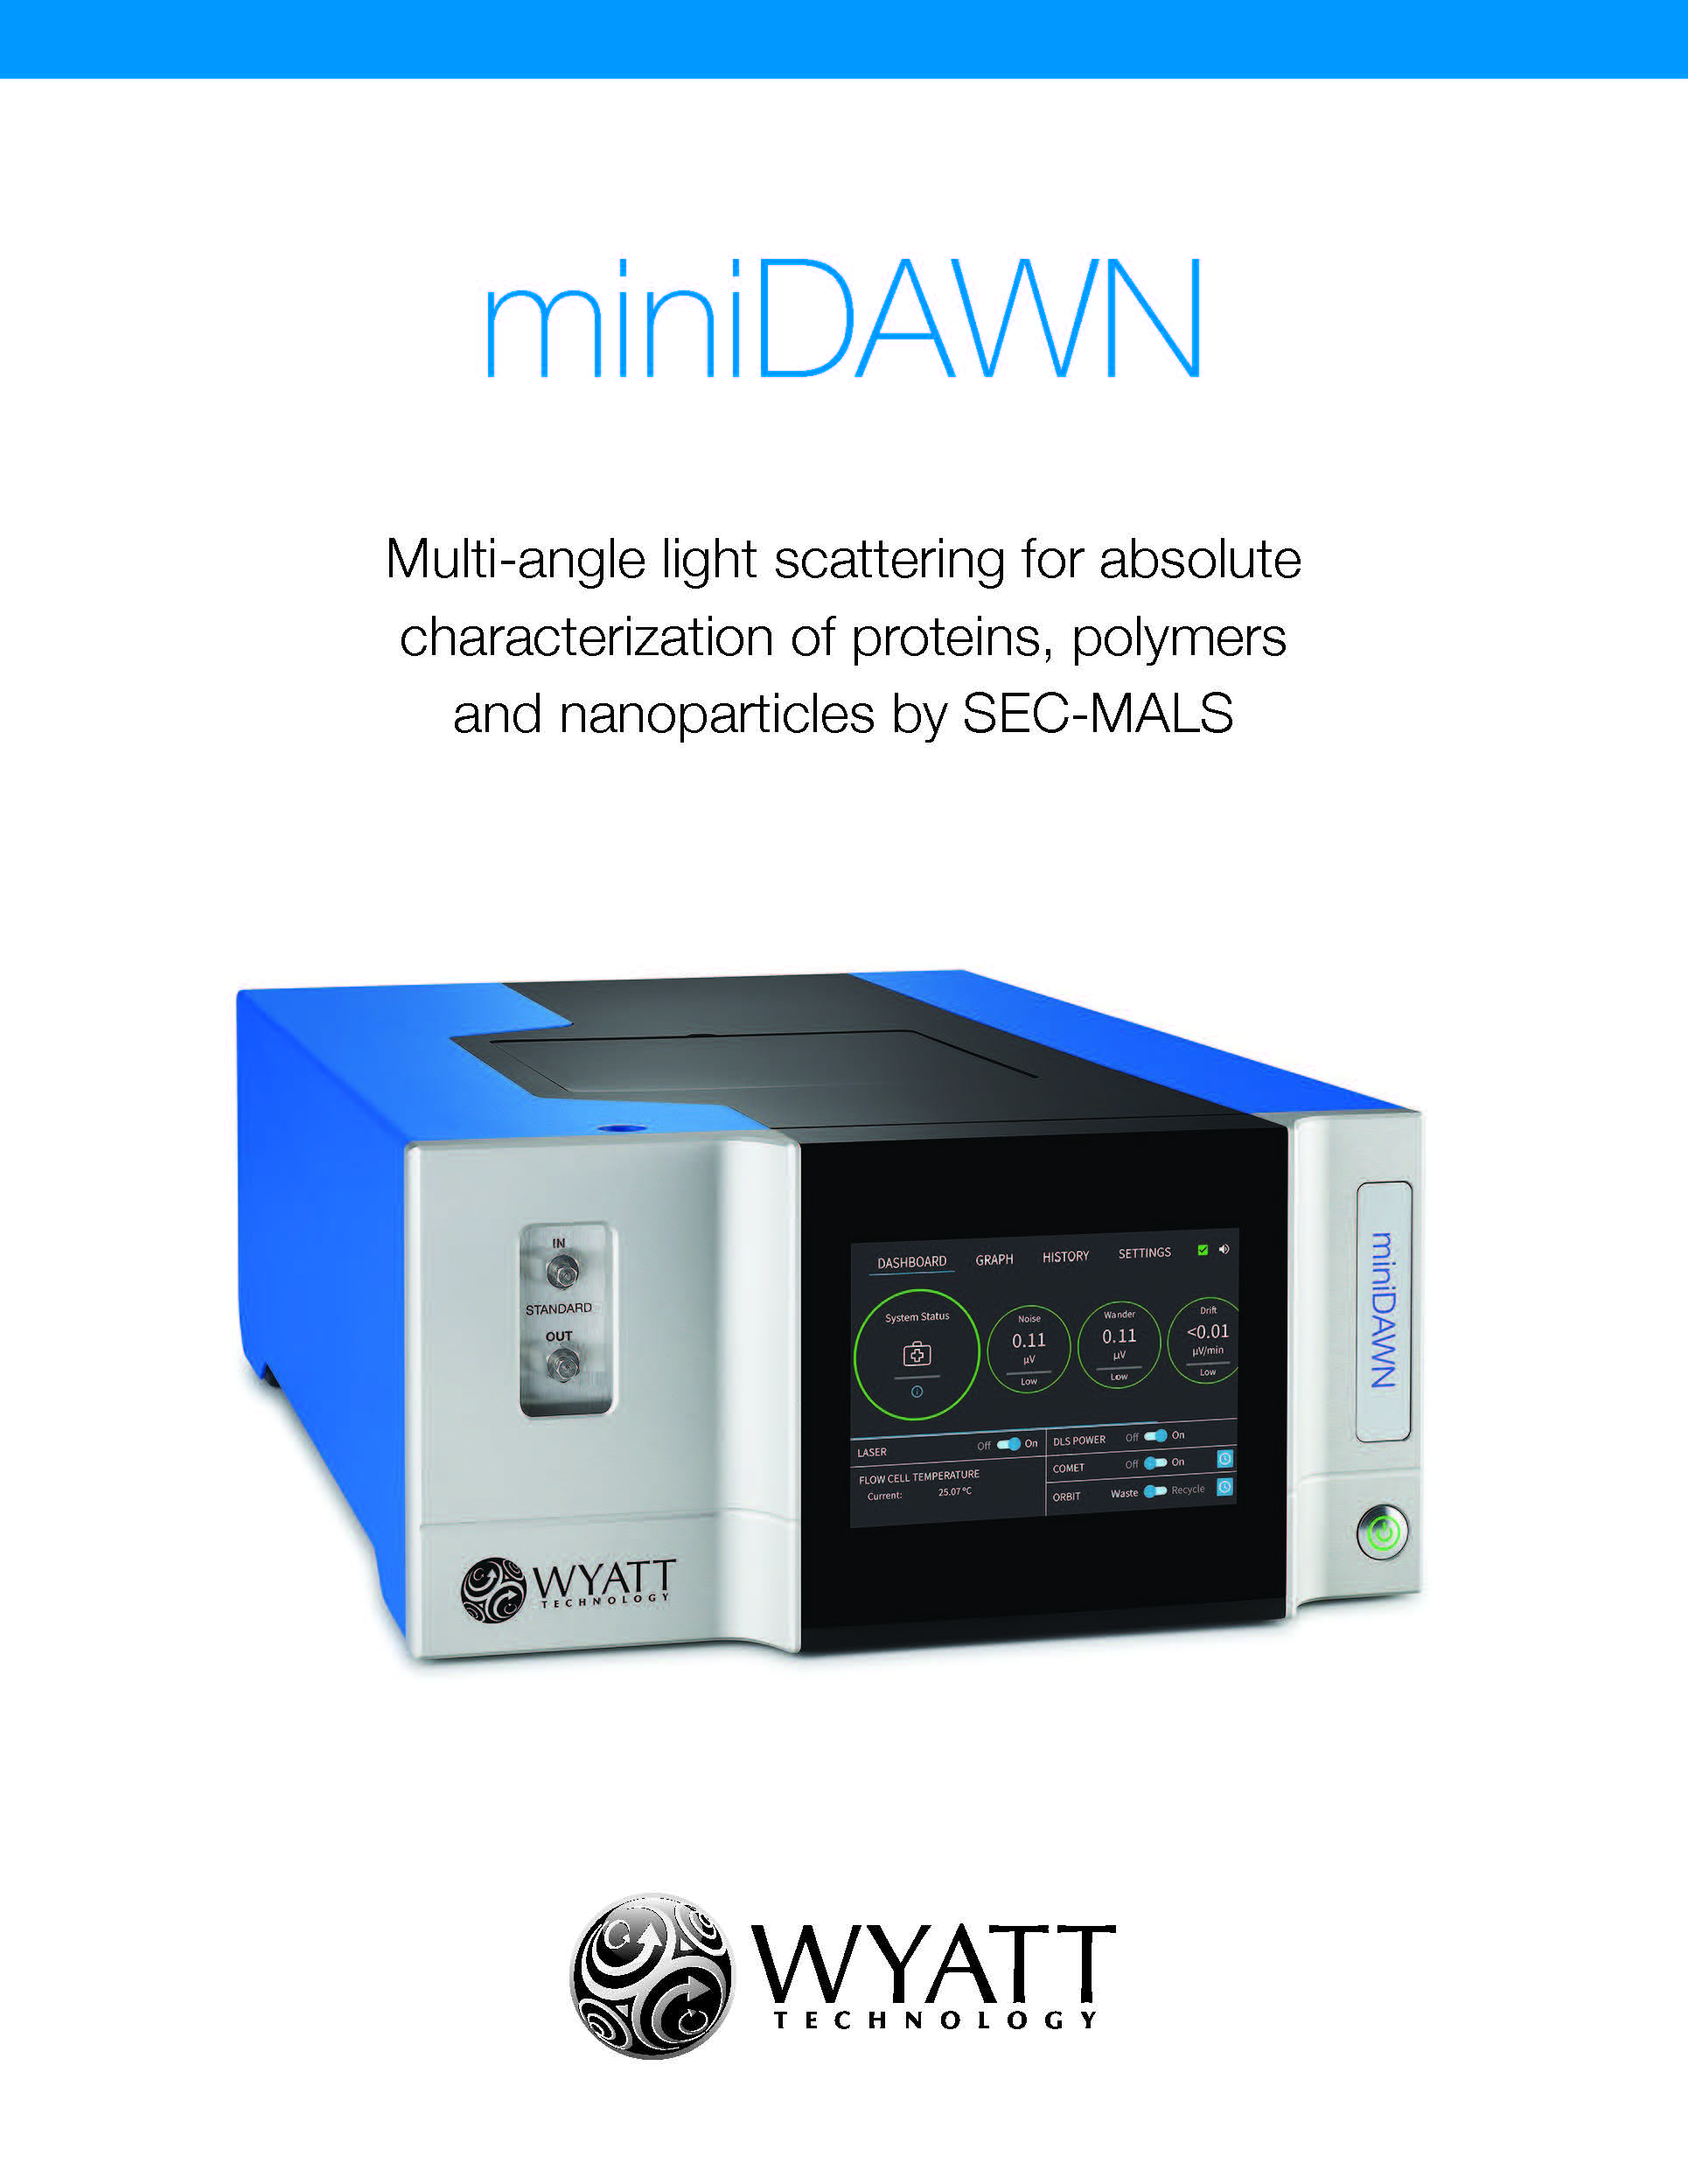 miniDAWN-Product-Brochure-W1400B_Page_01